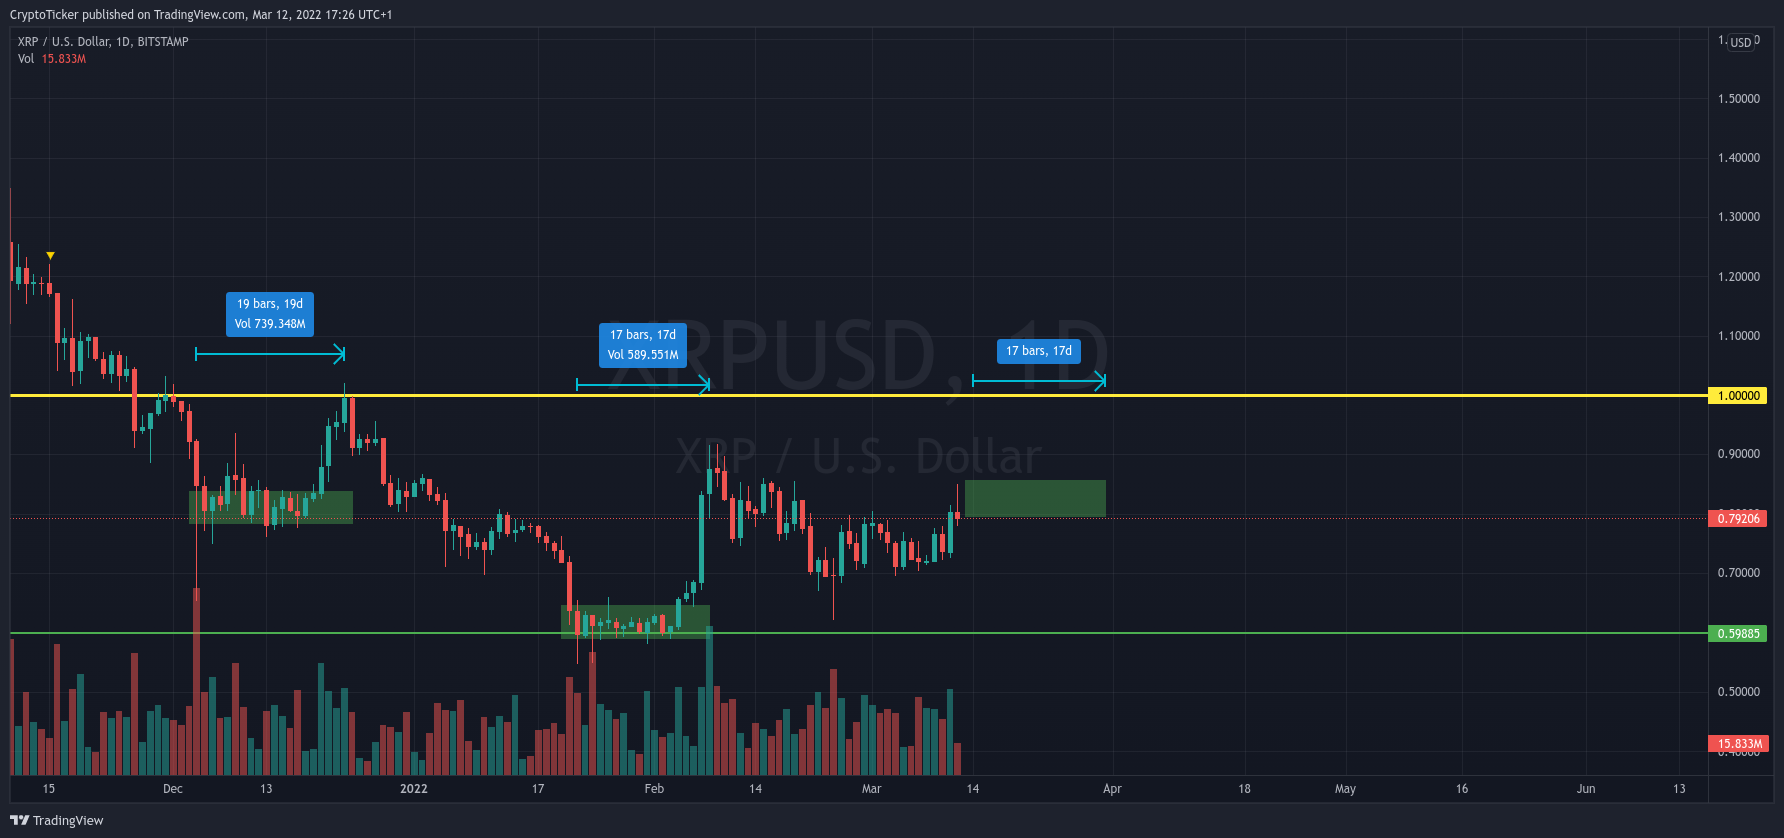 XRP/USD 1-day chart showing the potential timeline of XRP reaching $1